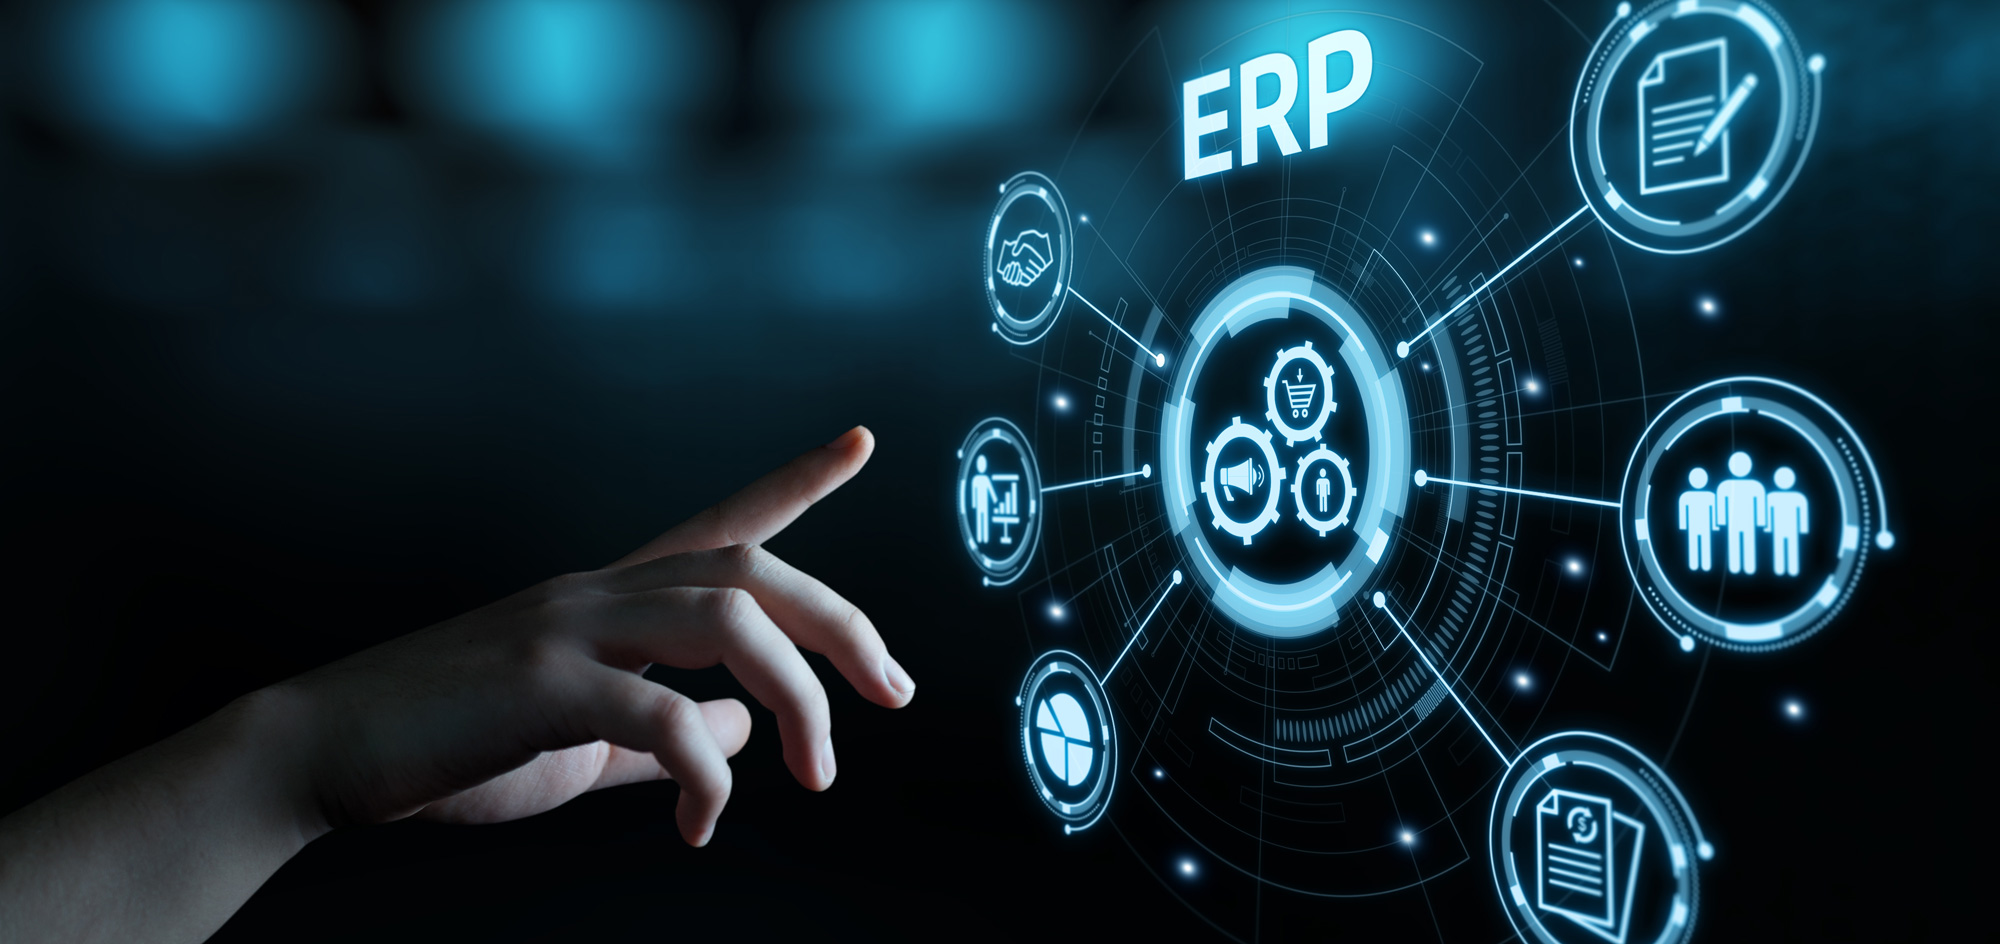 How ERP software can help your business thrive